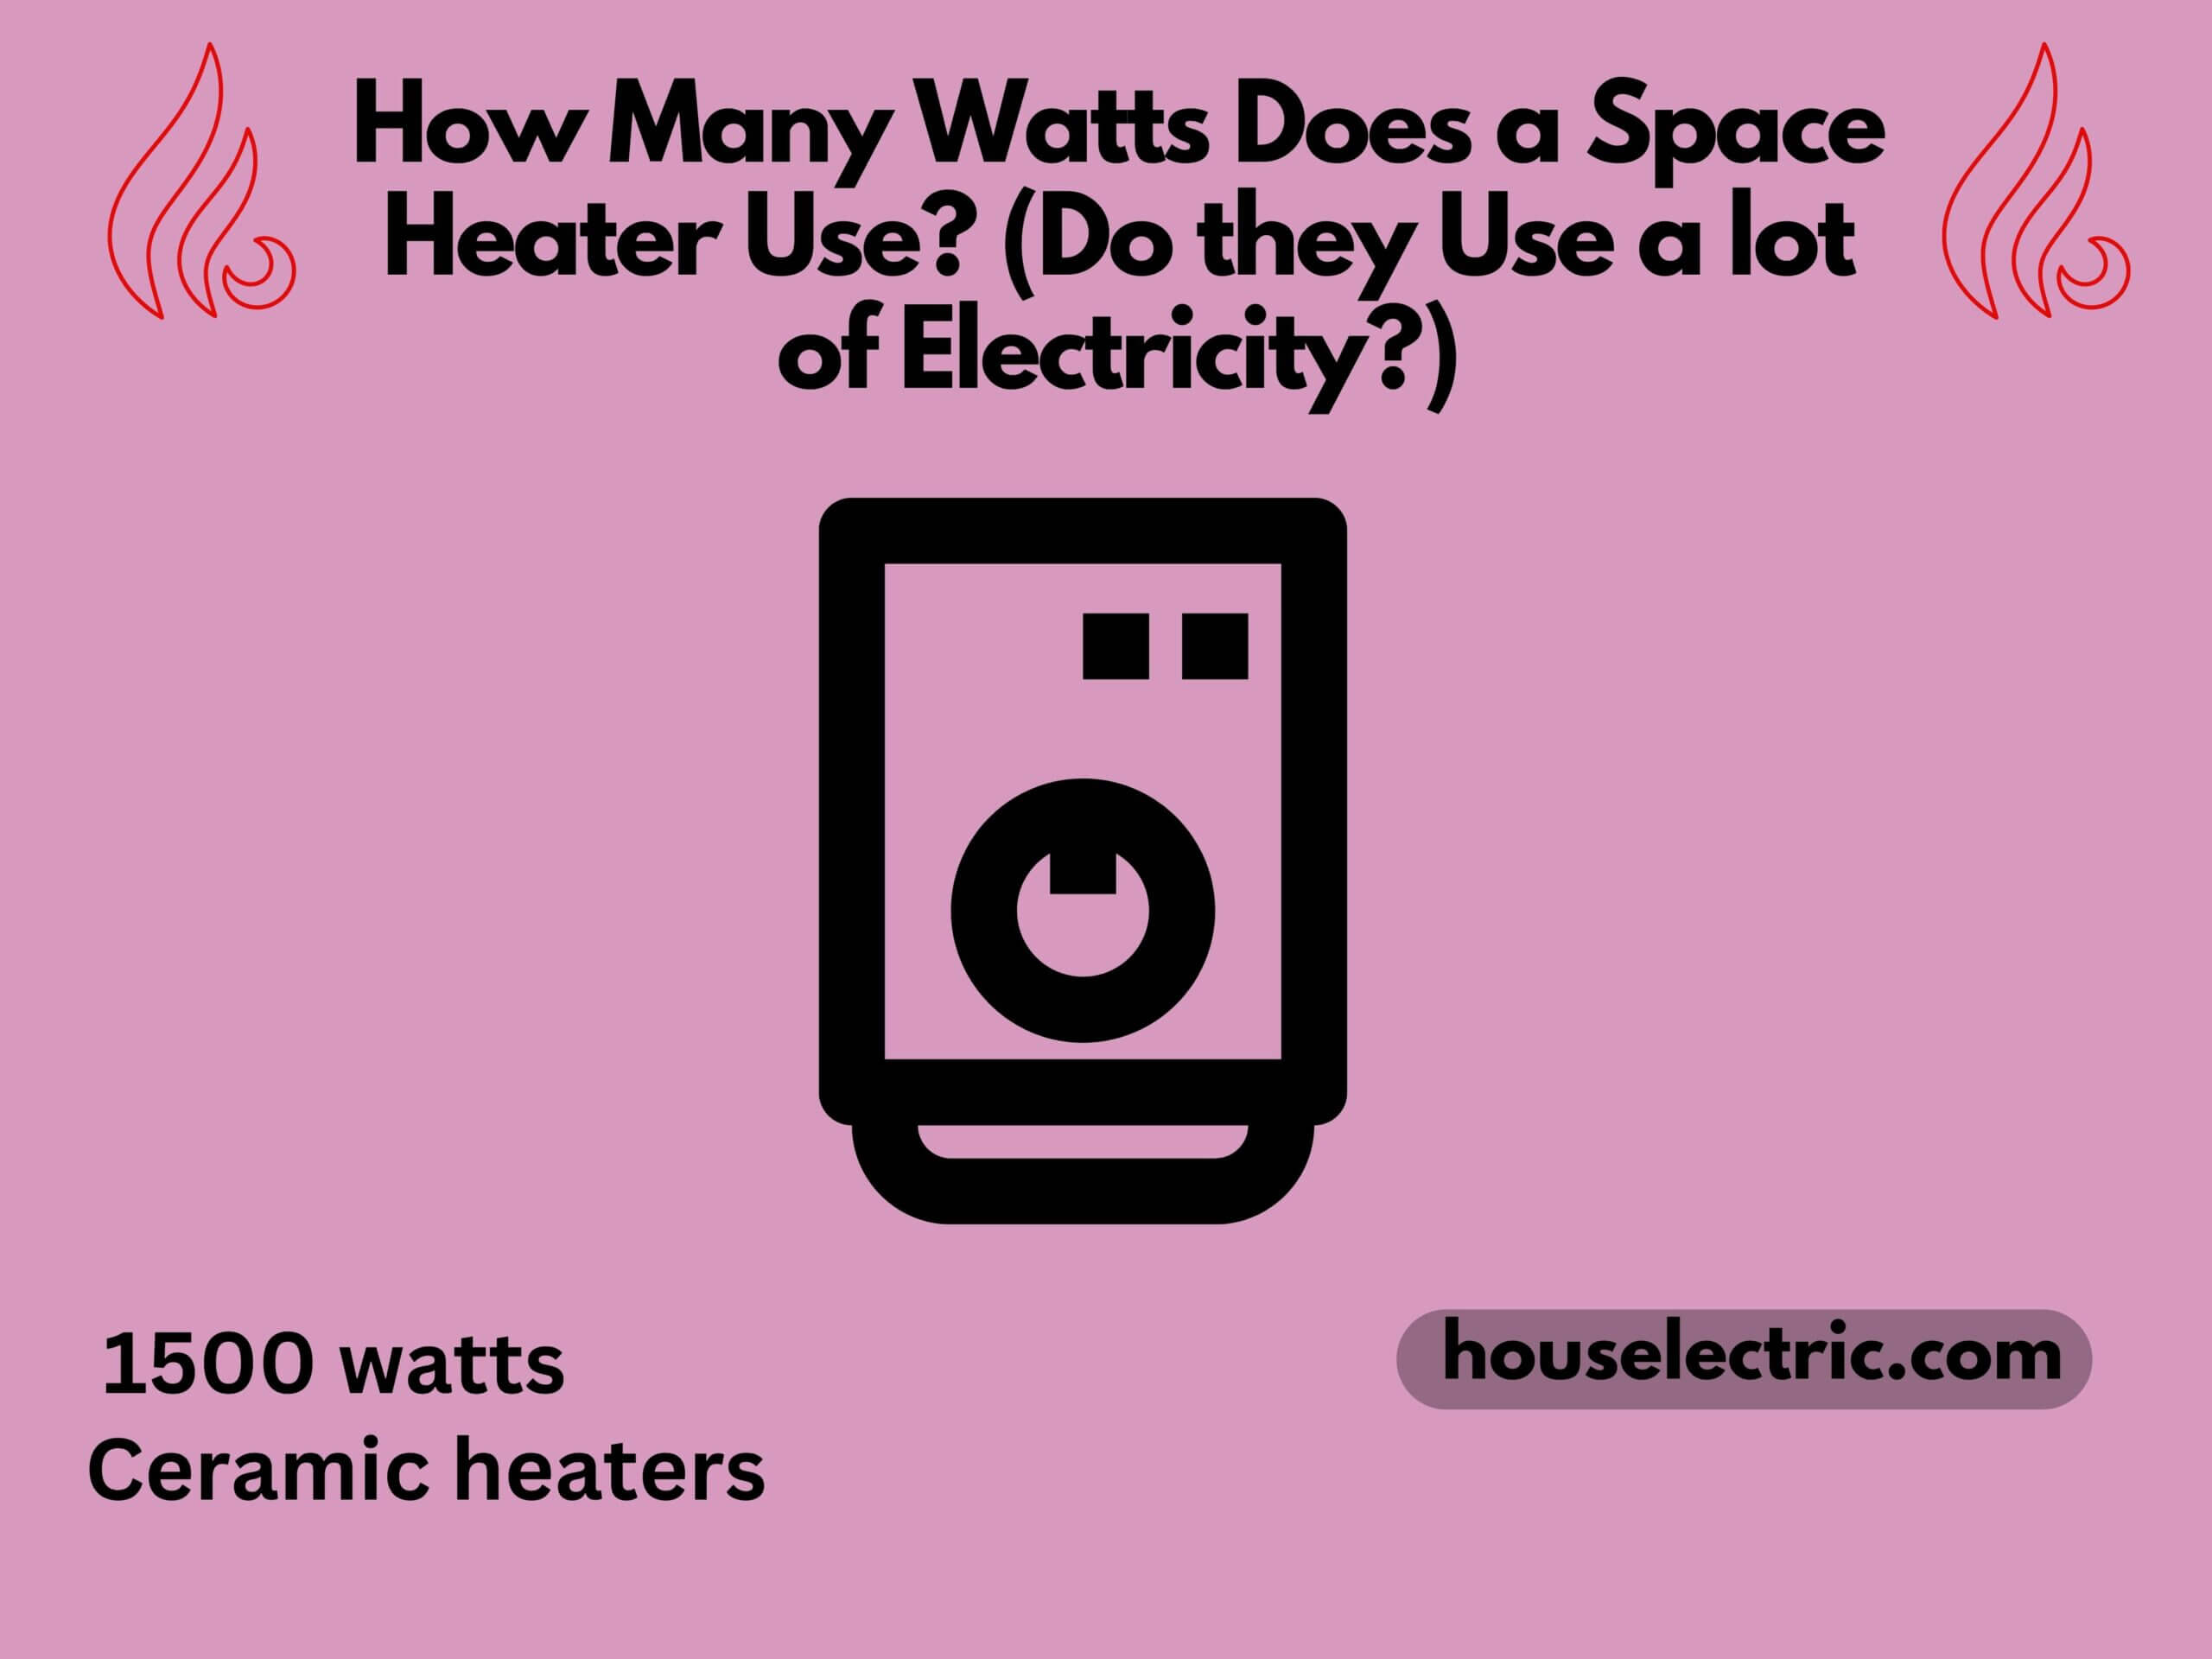 watts does a space heater use